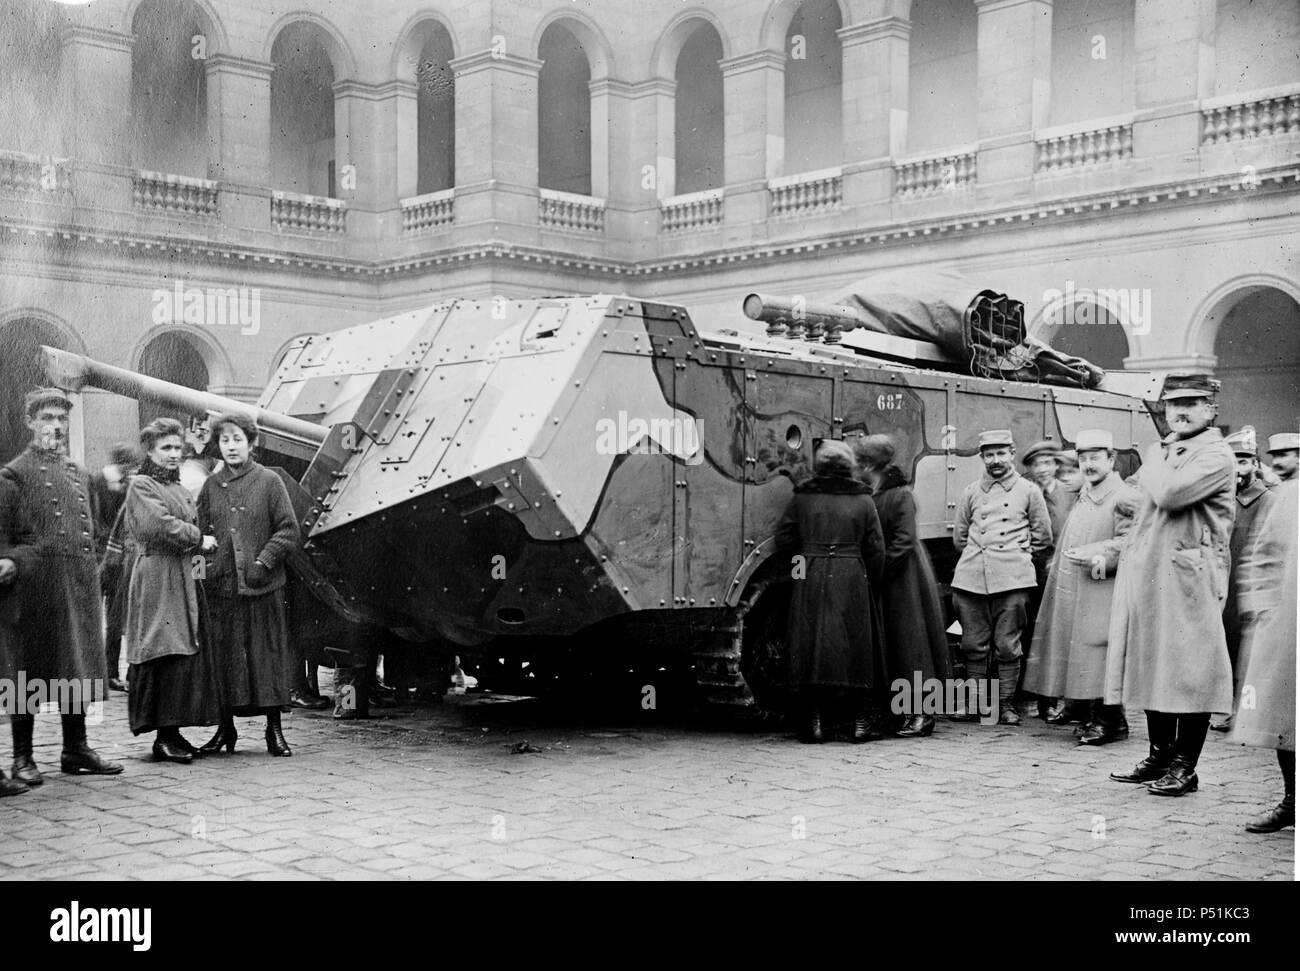 A French Saint-Chamond Tank (Char Saint-Chamond) which was manufactured between 1917 and 1918 during World War I Stock Photo